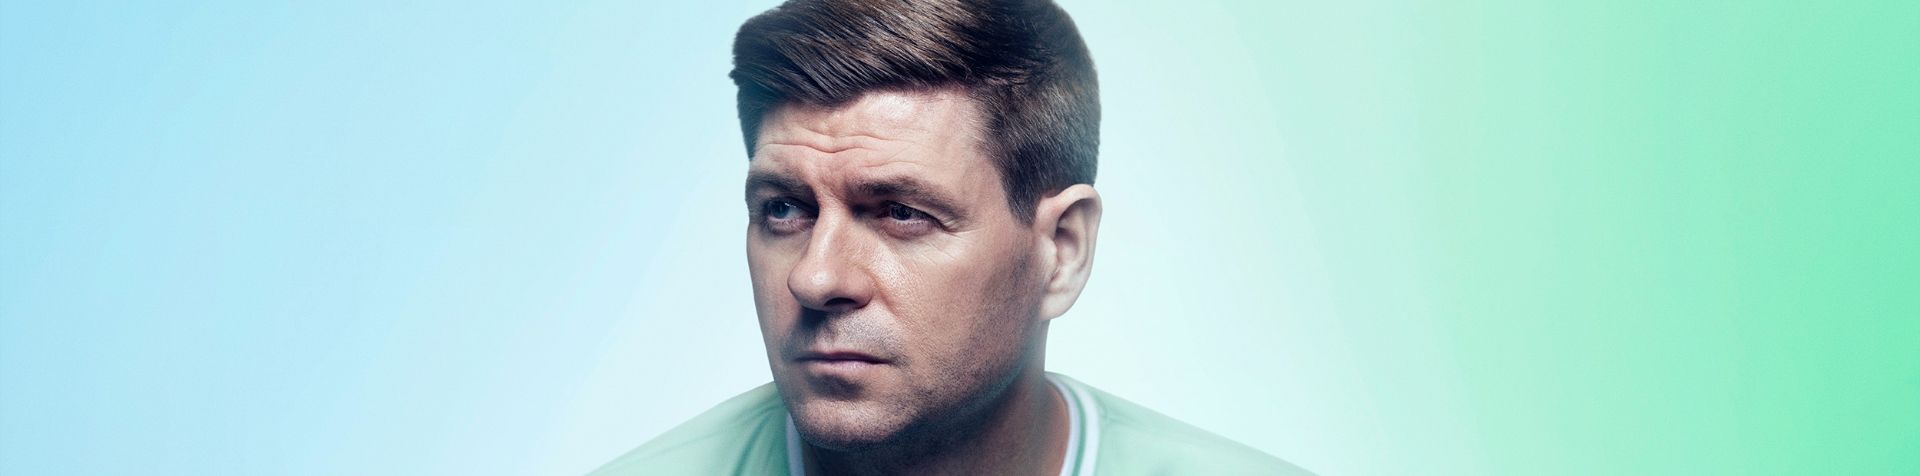 A close-up of Steven Gerrard’s face. He is looking to the left and wearing his Team Century jersey.